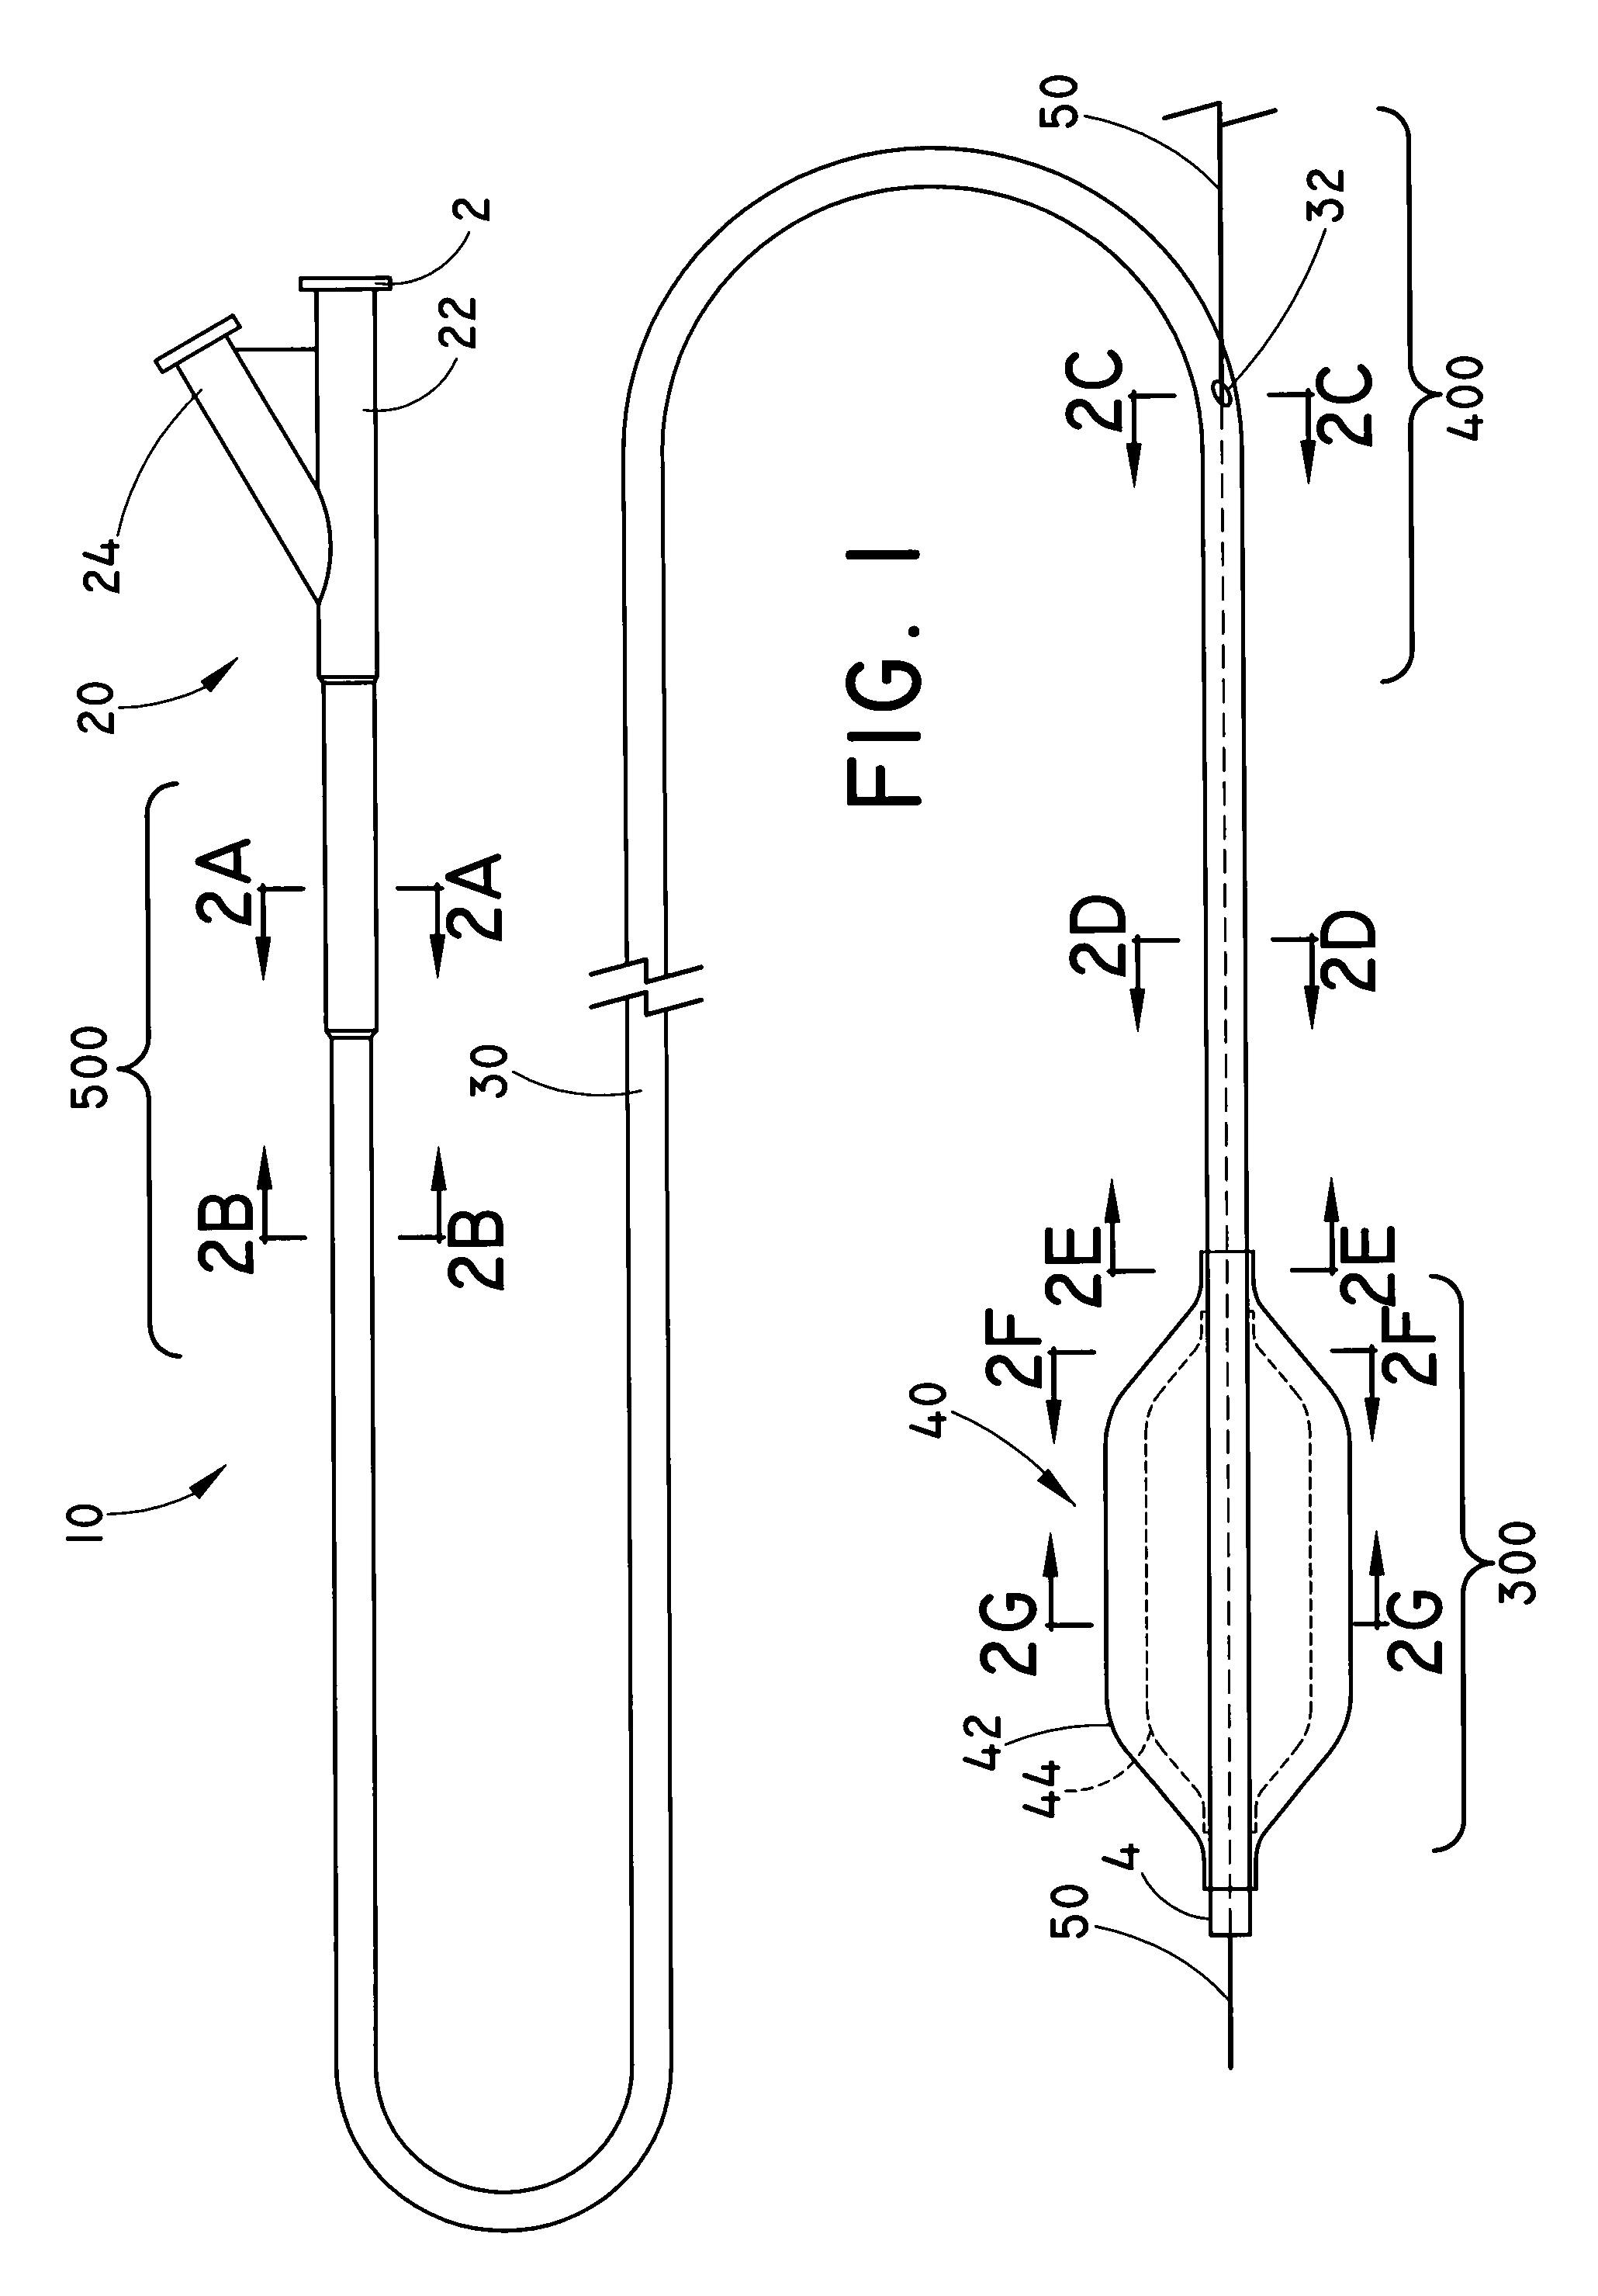 Balloon catheter for delivering a therapeutic agent